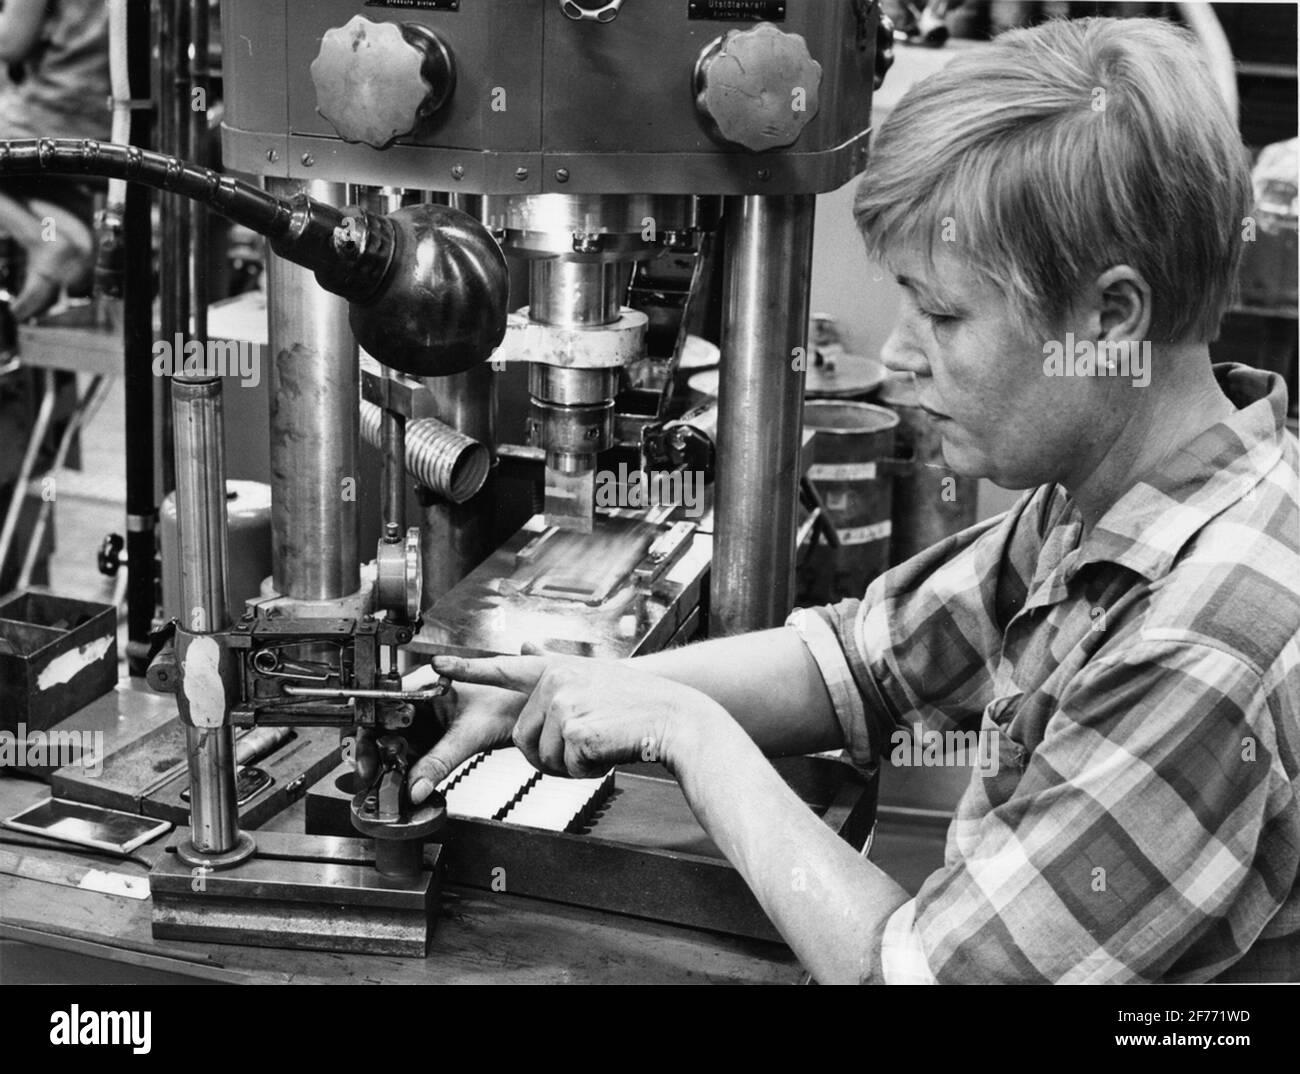 Fabersta Bruks AB. Mrs. Hilkka Rool at a machine, where carbide powder is pressed for S.K. Form pieces, in this case cut to rock drills. Each molding is immediately monitored after the pressing. Stock Photo